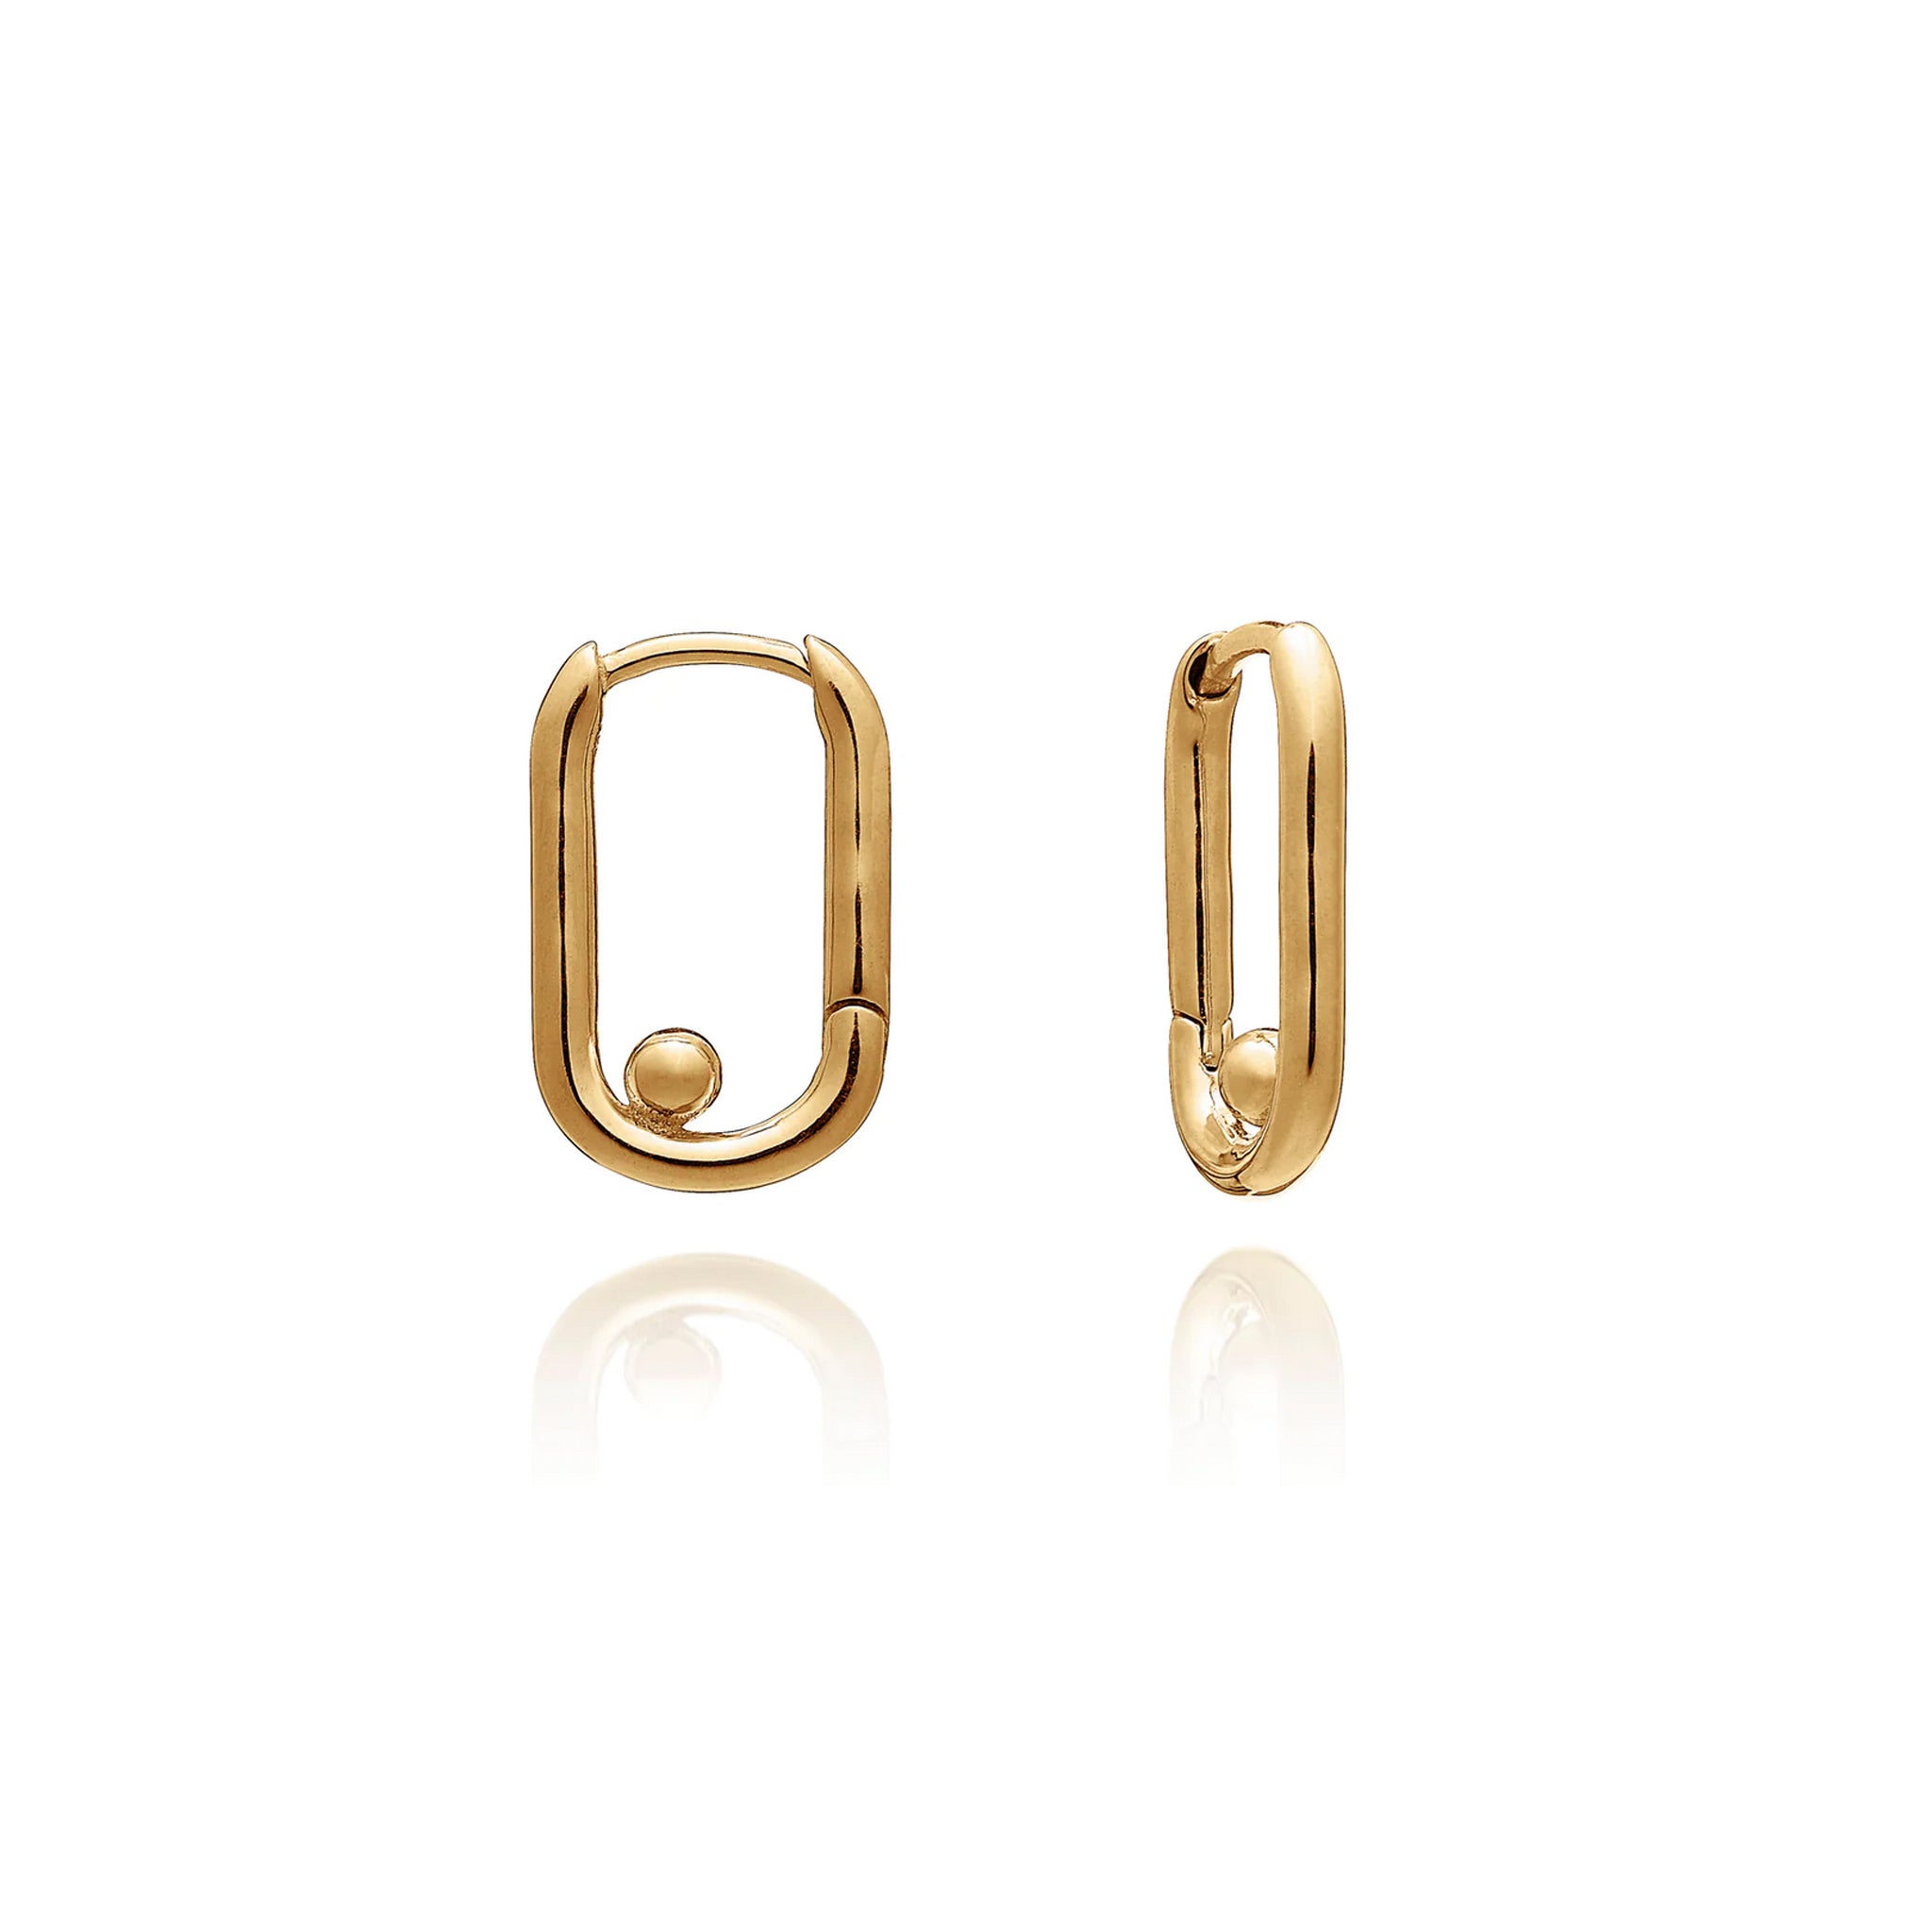 A pair of Stellar Hardware Huggie Hoop Earrings - Gold by Rachel Jackson with a gold orb in the middle.